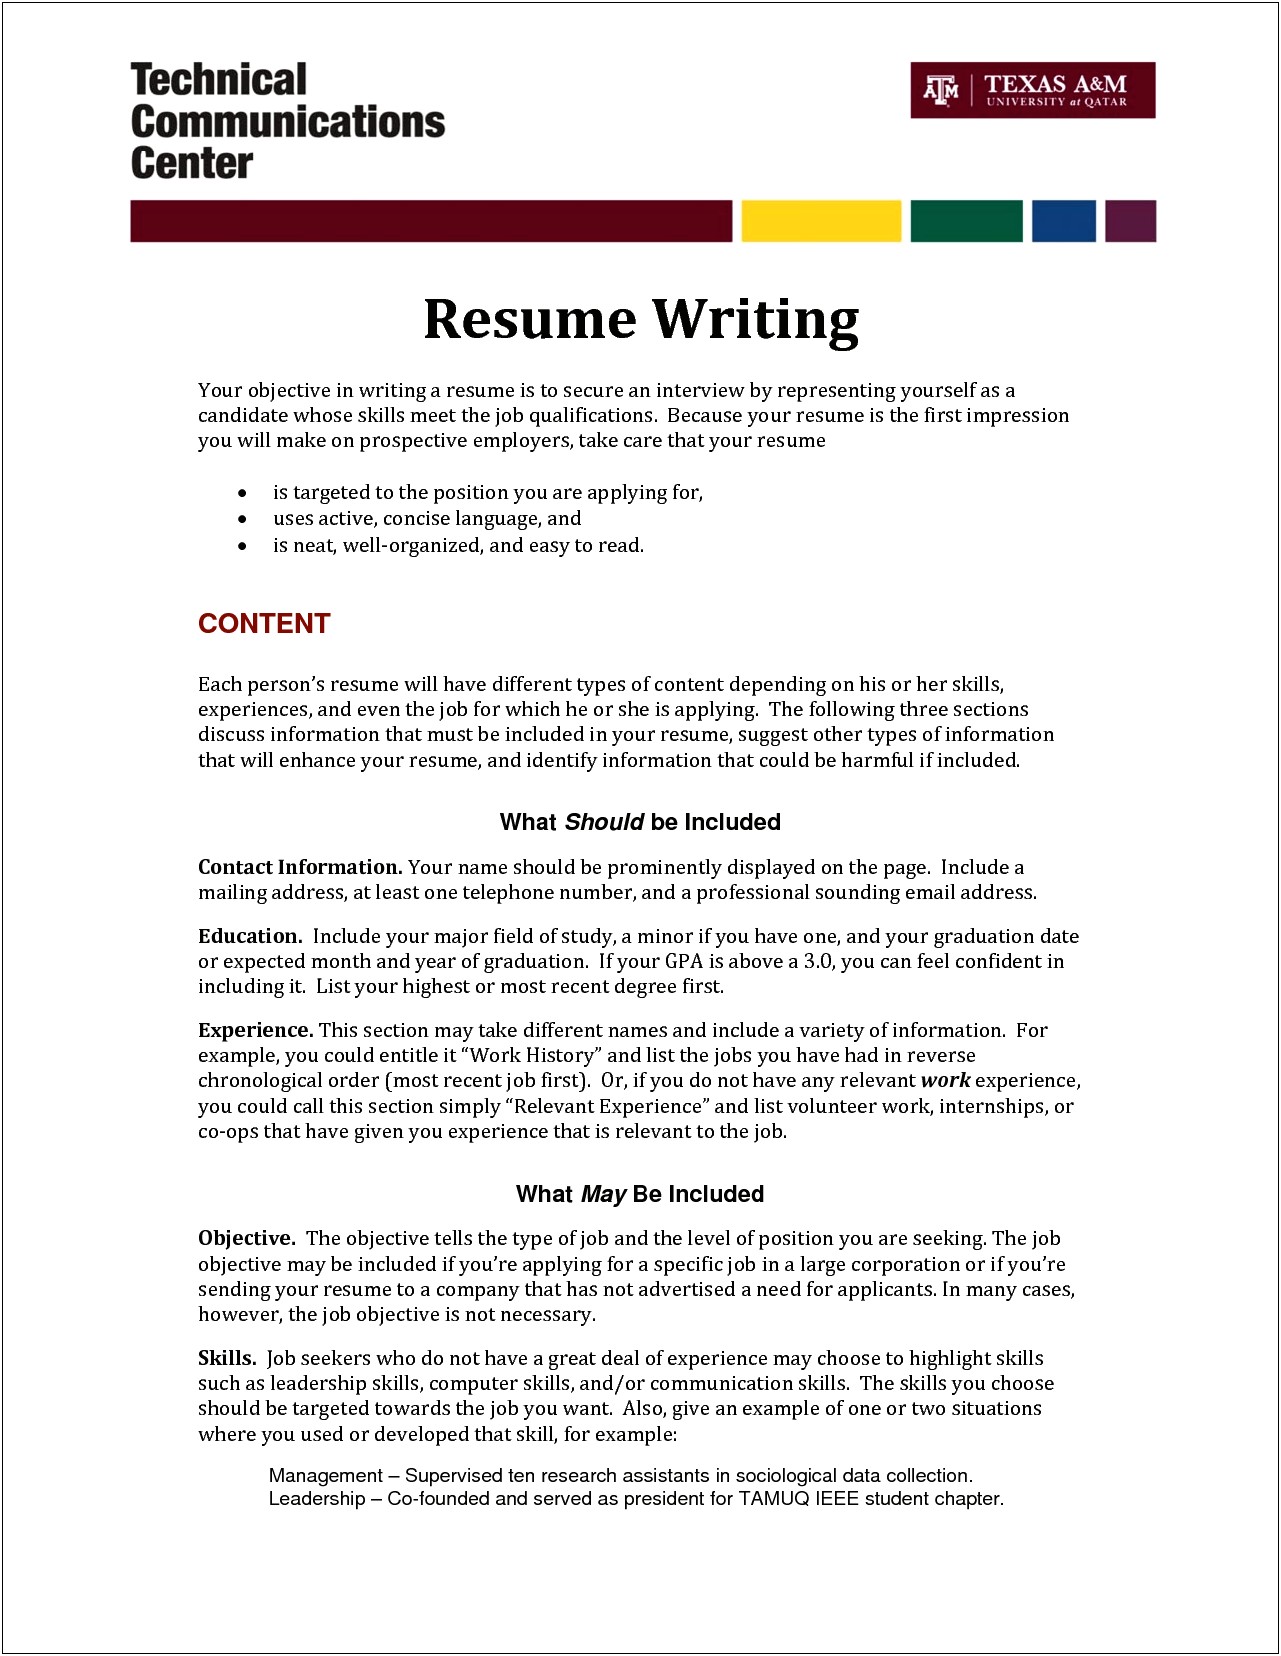 Should A Resume Include An Objective